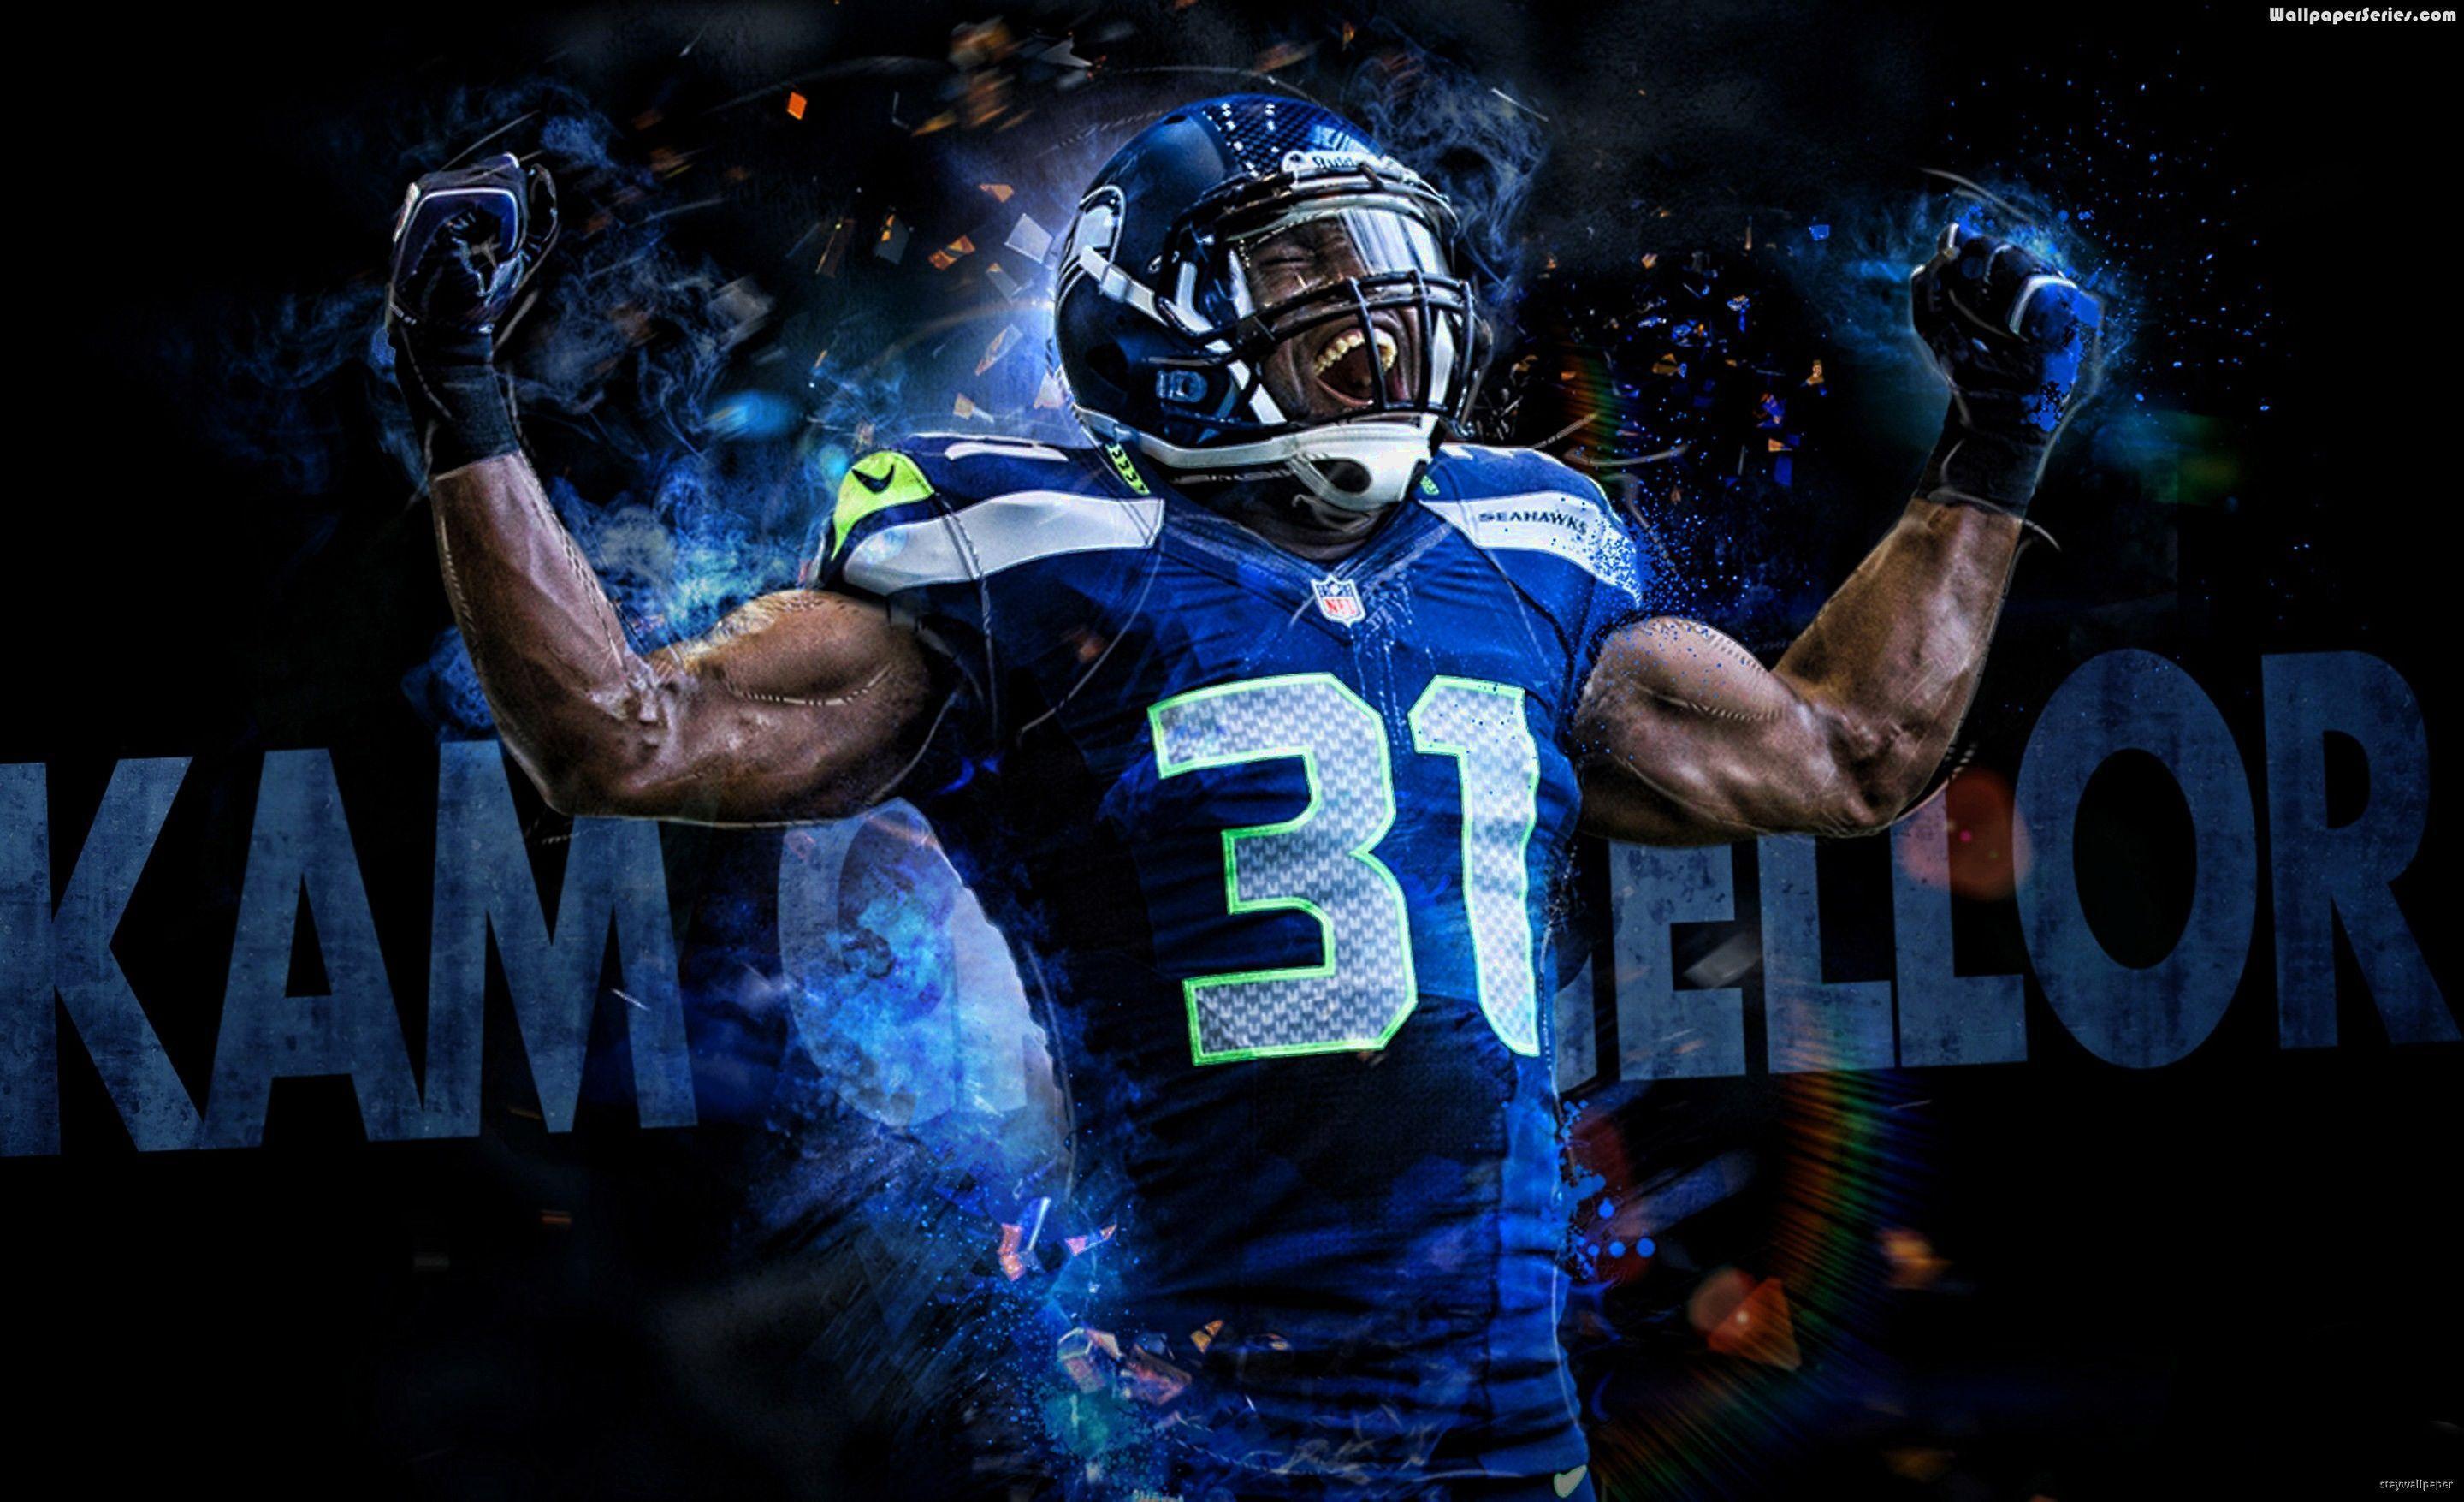 Wallpaper Of Football Player Wallpapers